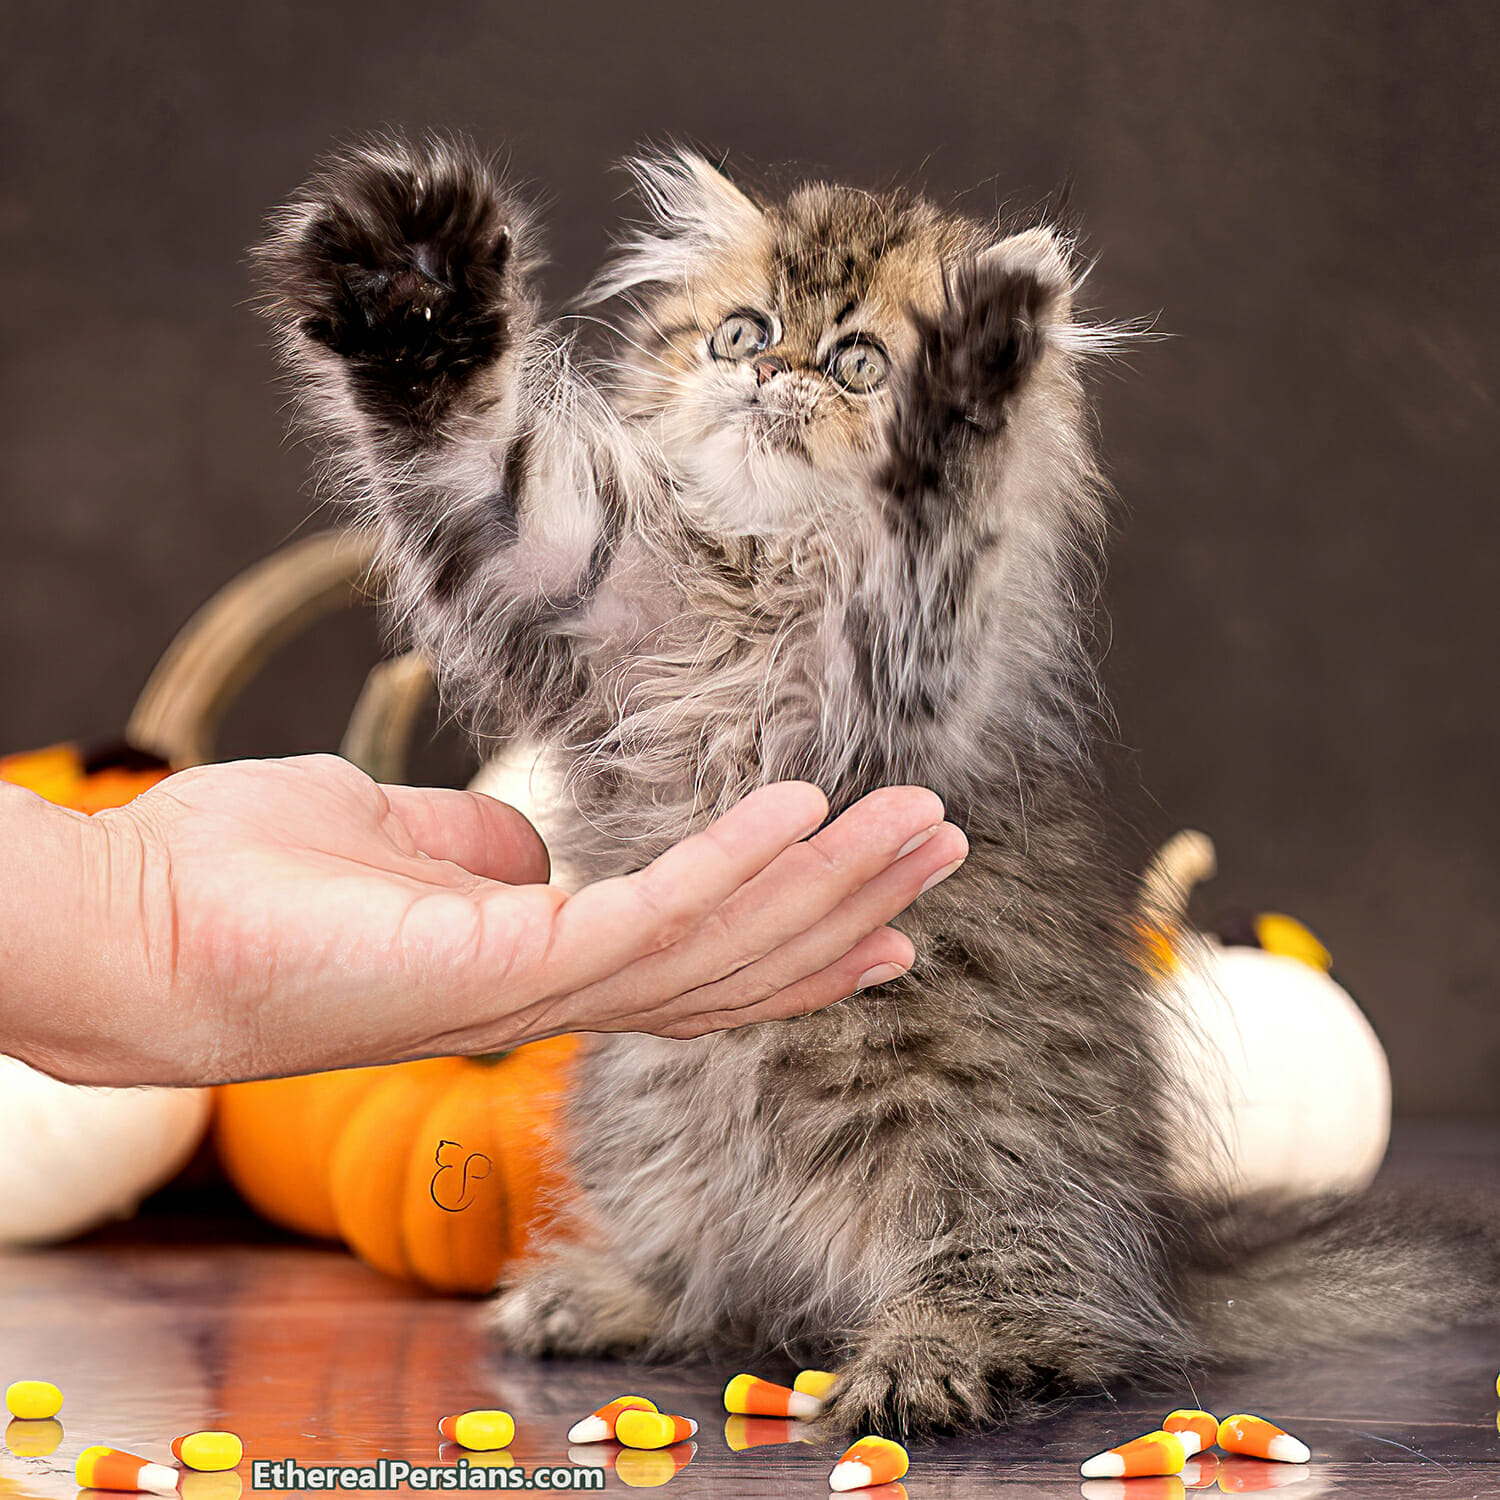 Persian Kitten in front of Halloween Pumpkins and Candy corns has paws in the air asking to be picked up.